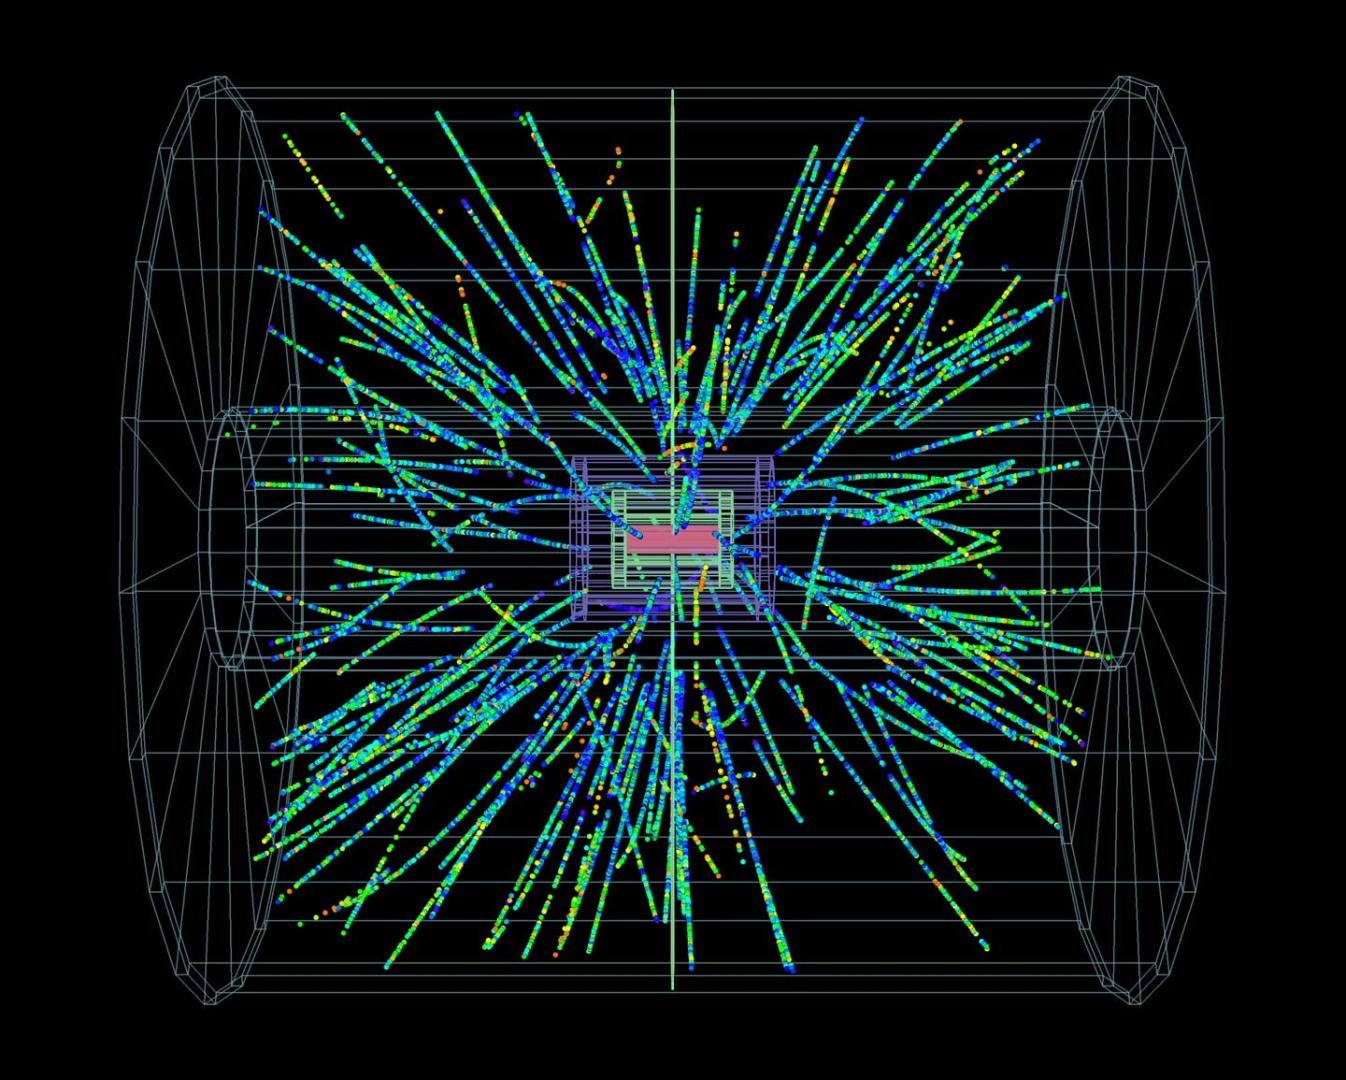 Protons smash lead ions in first LHC collisions of 2013 | CERN